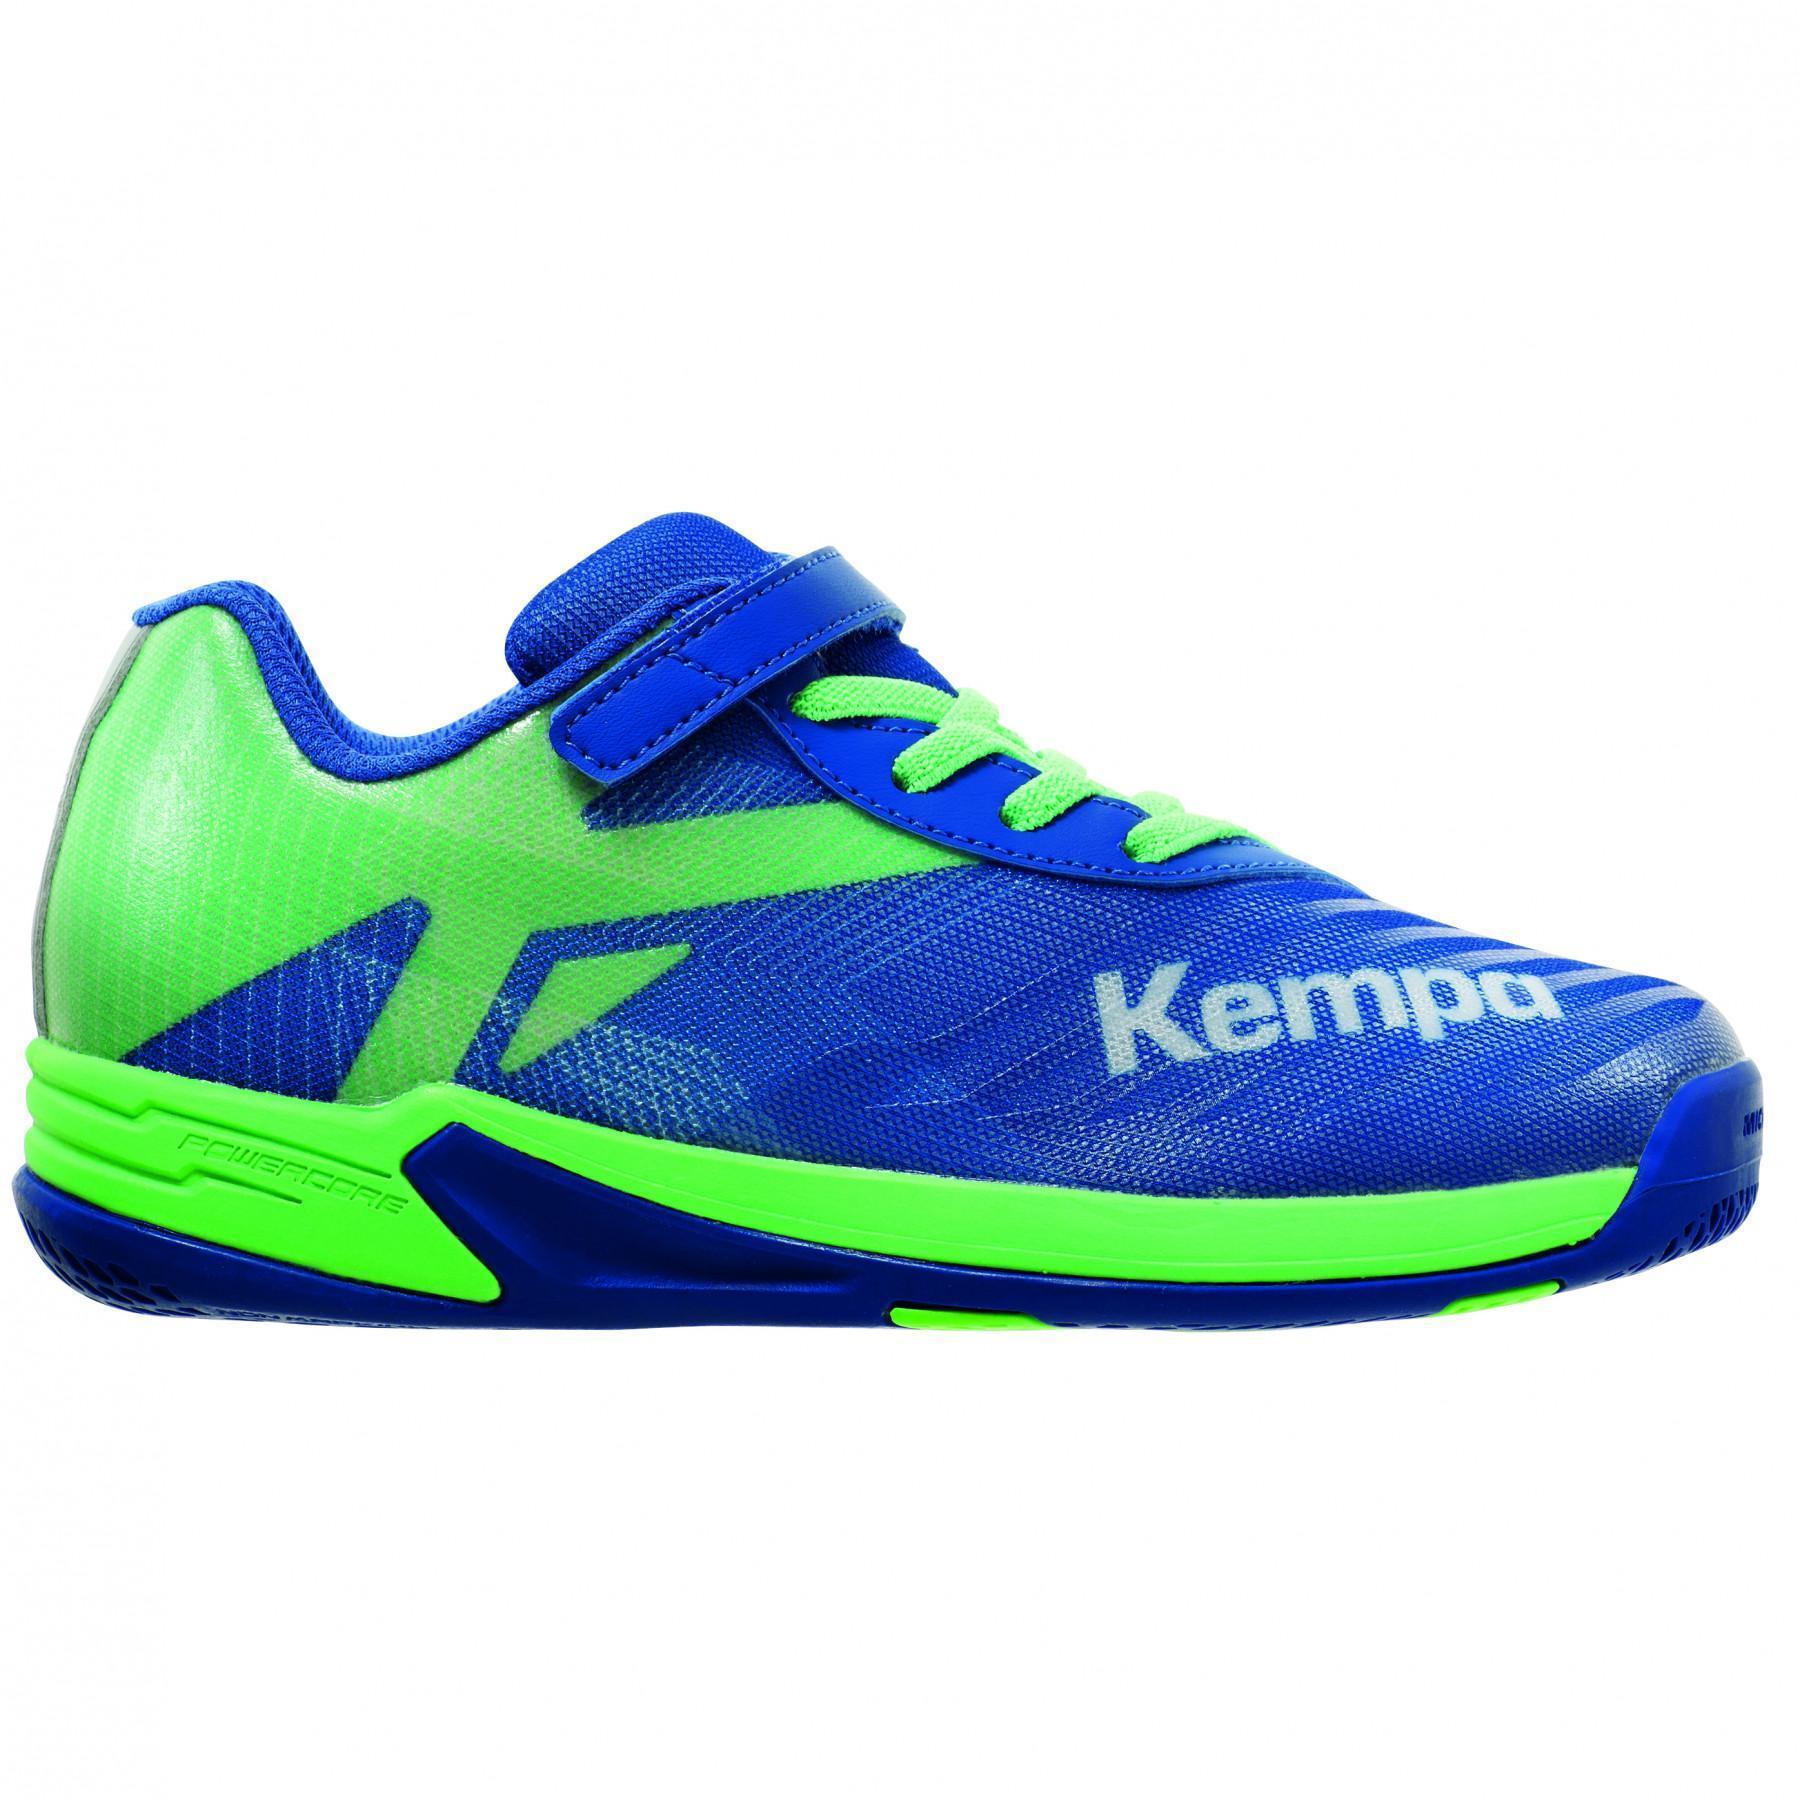 Children's shoe without velcro wing 2.0 Kempa